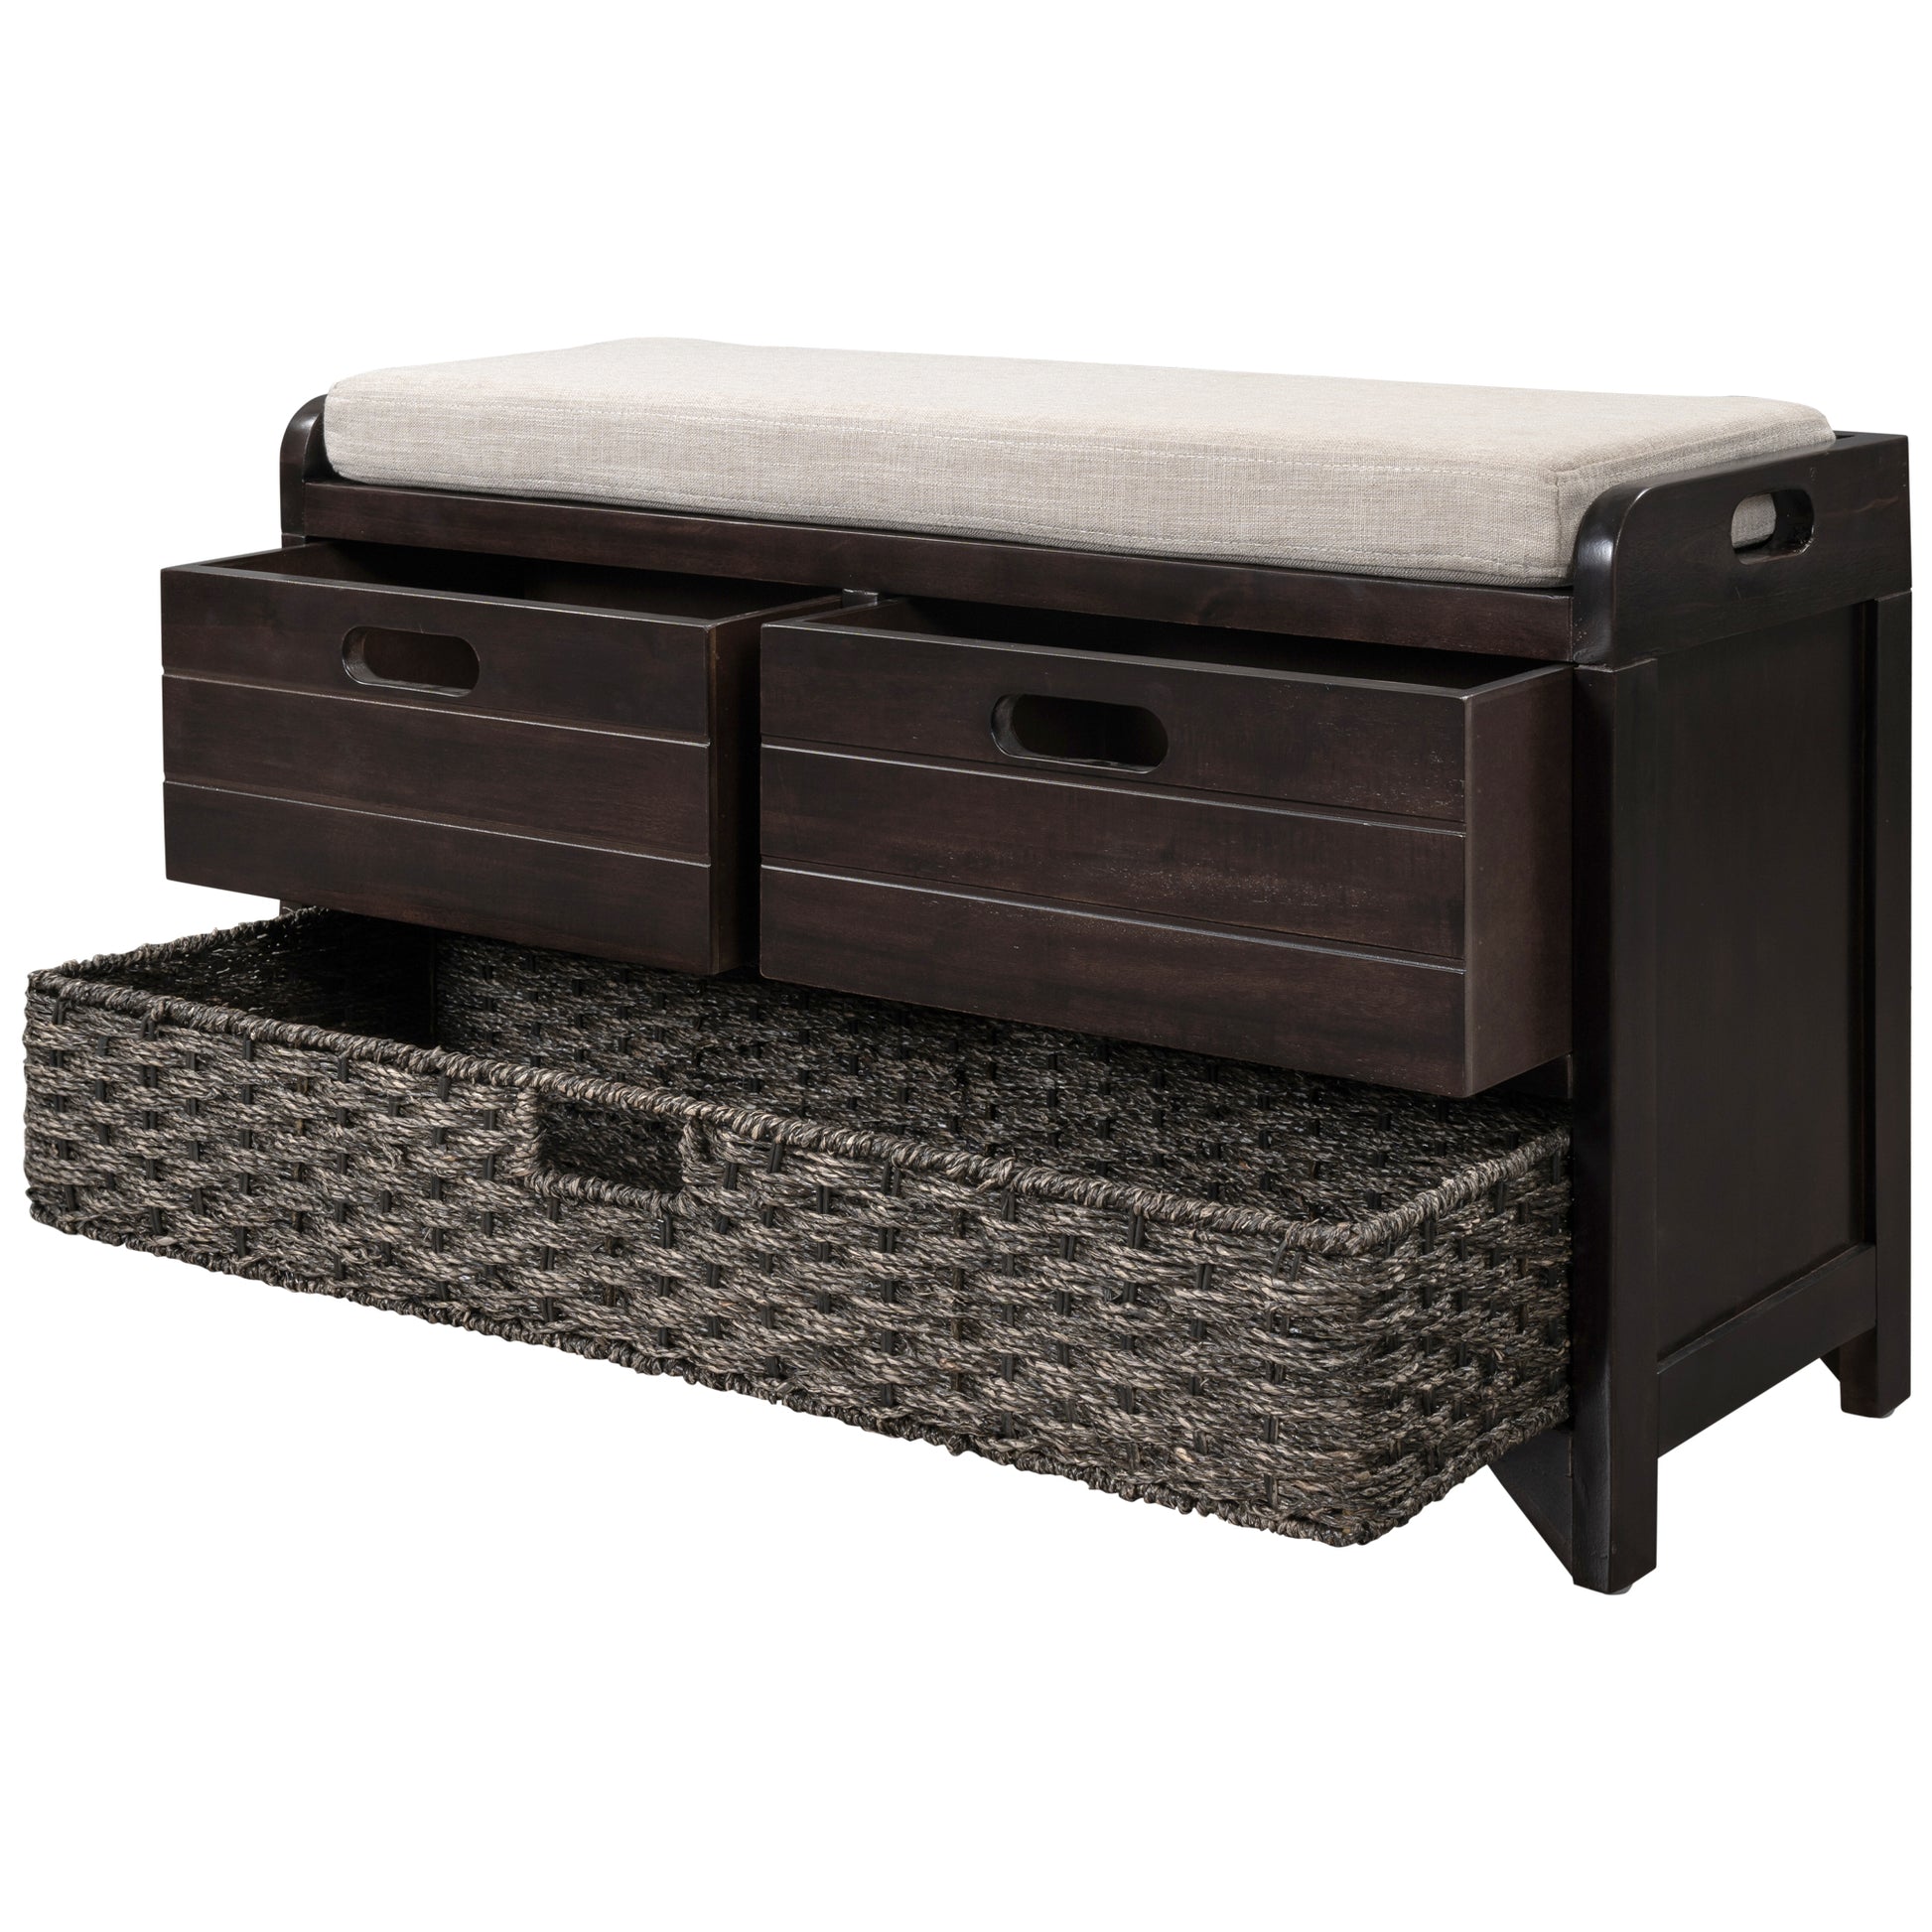 TREXM Storage Bench with Removable Basket and 2 Drawers - Espresso